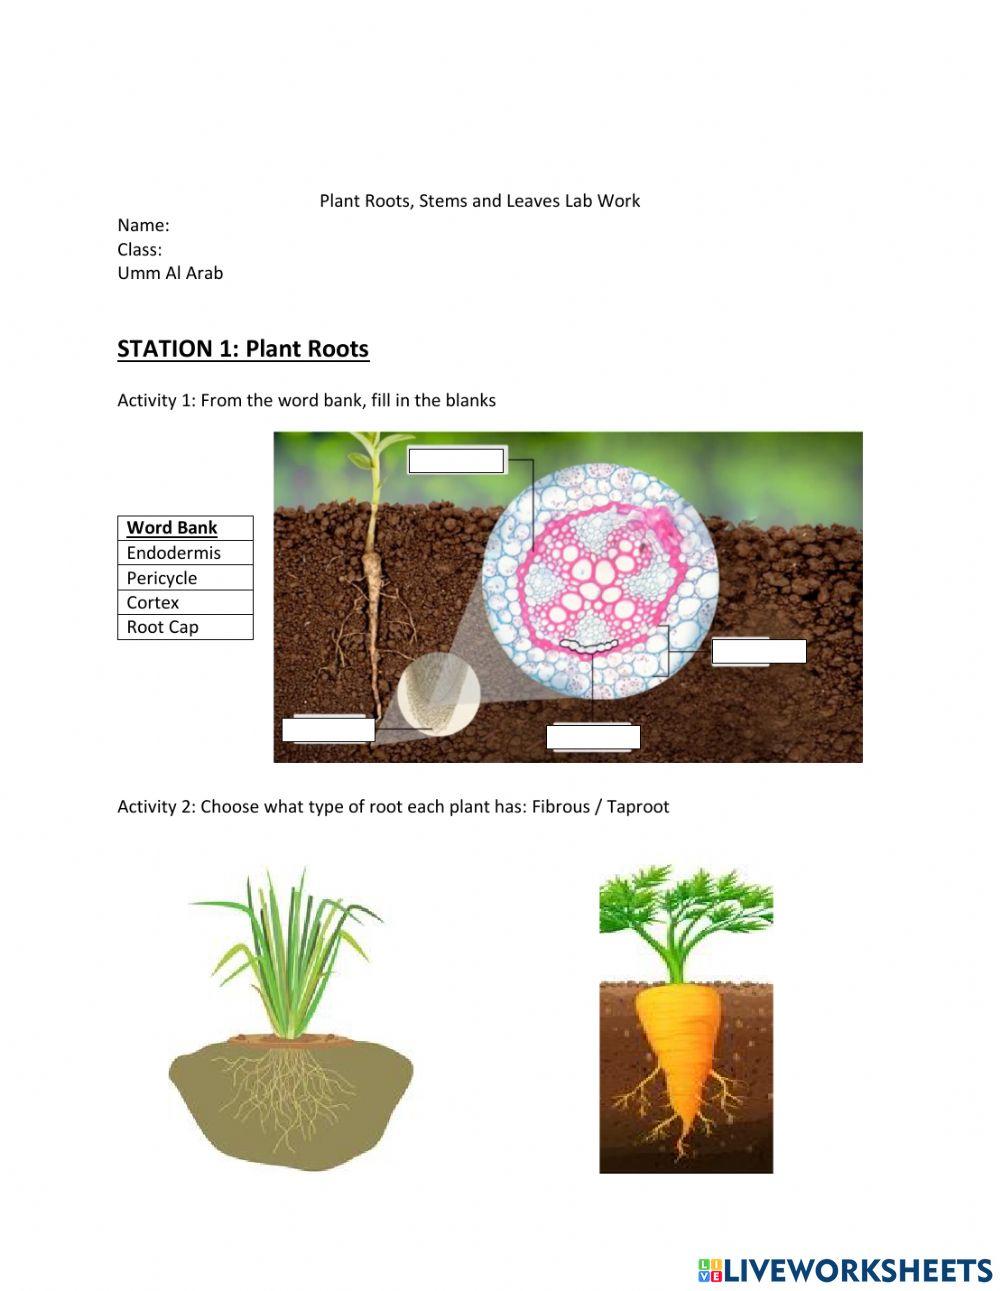 Plants Root, Stems and Leaves